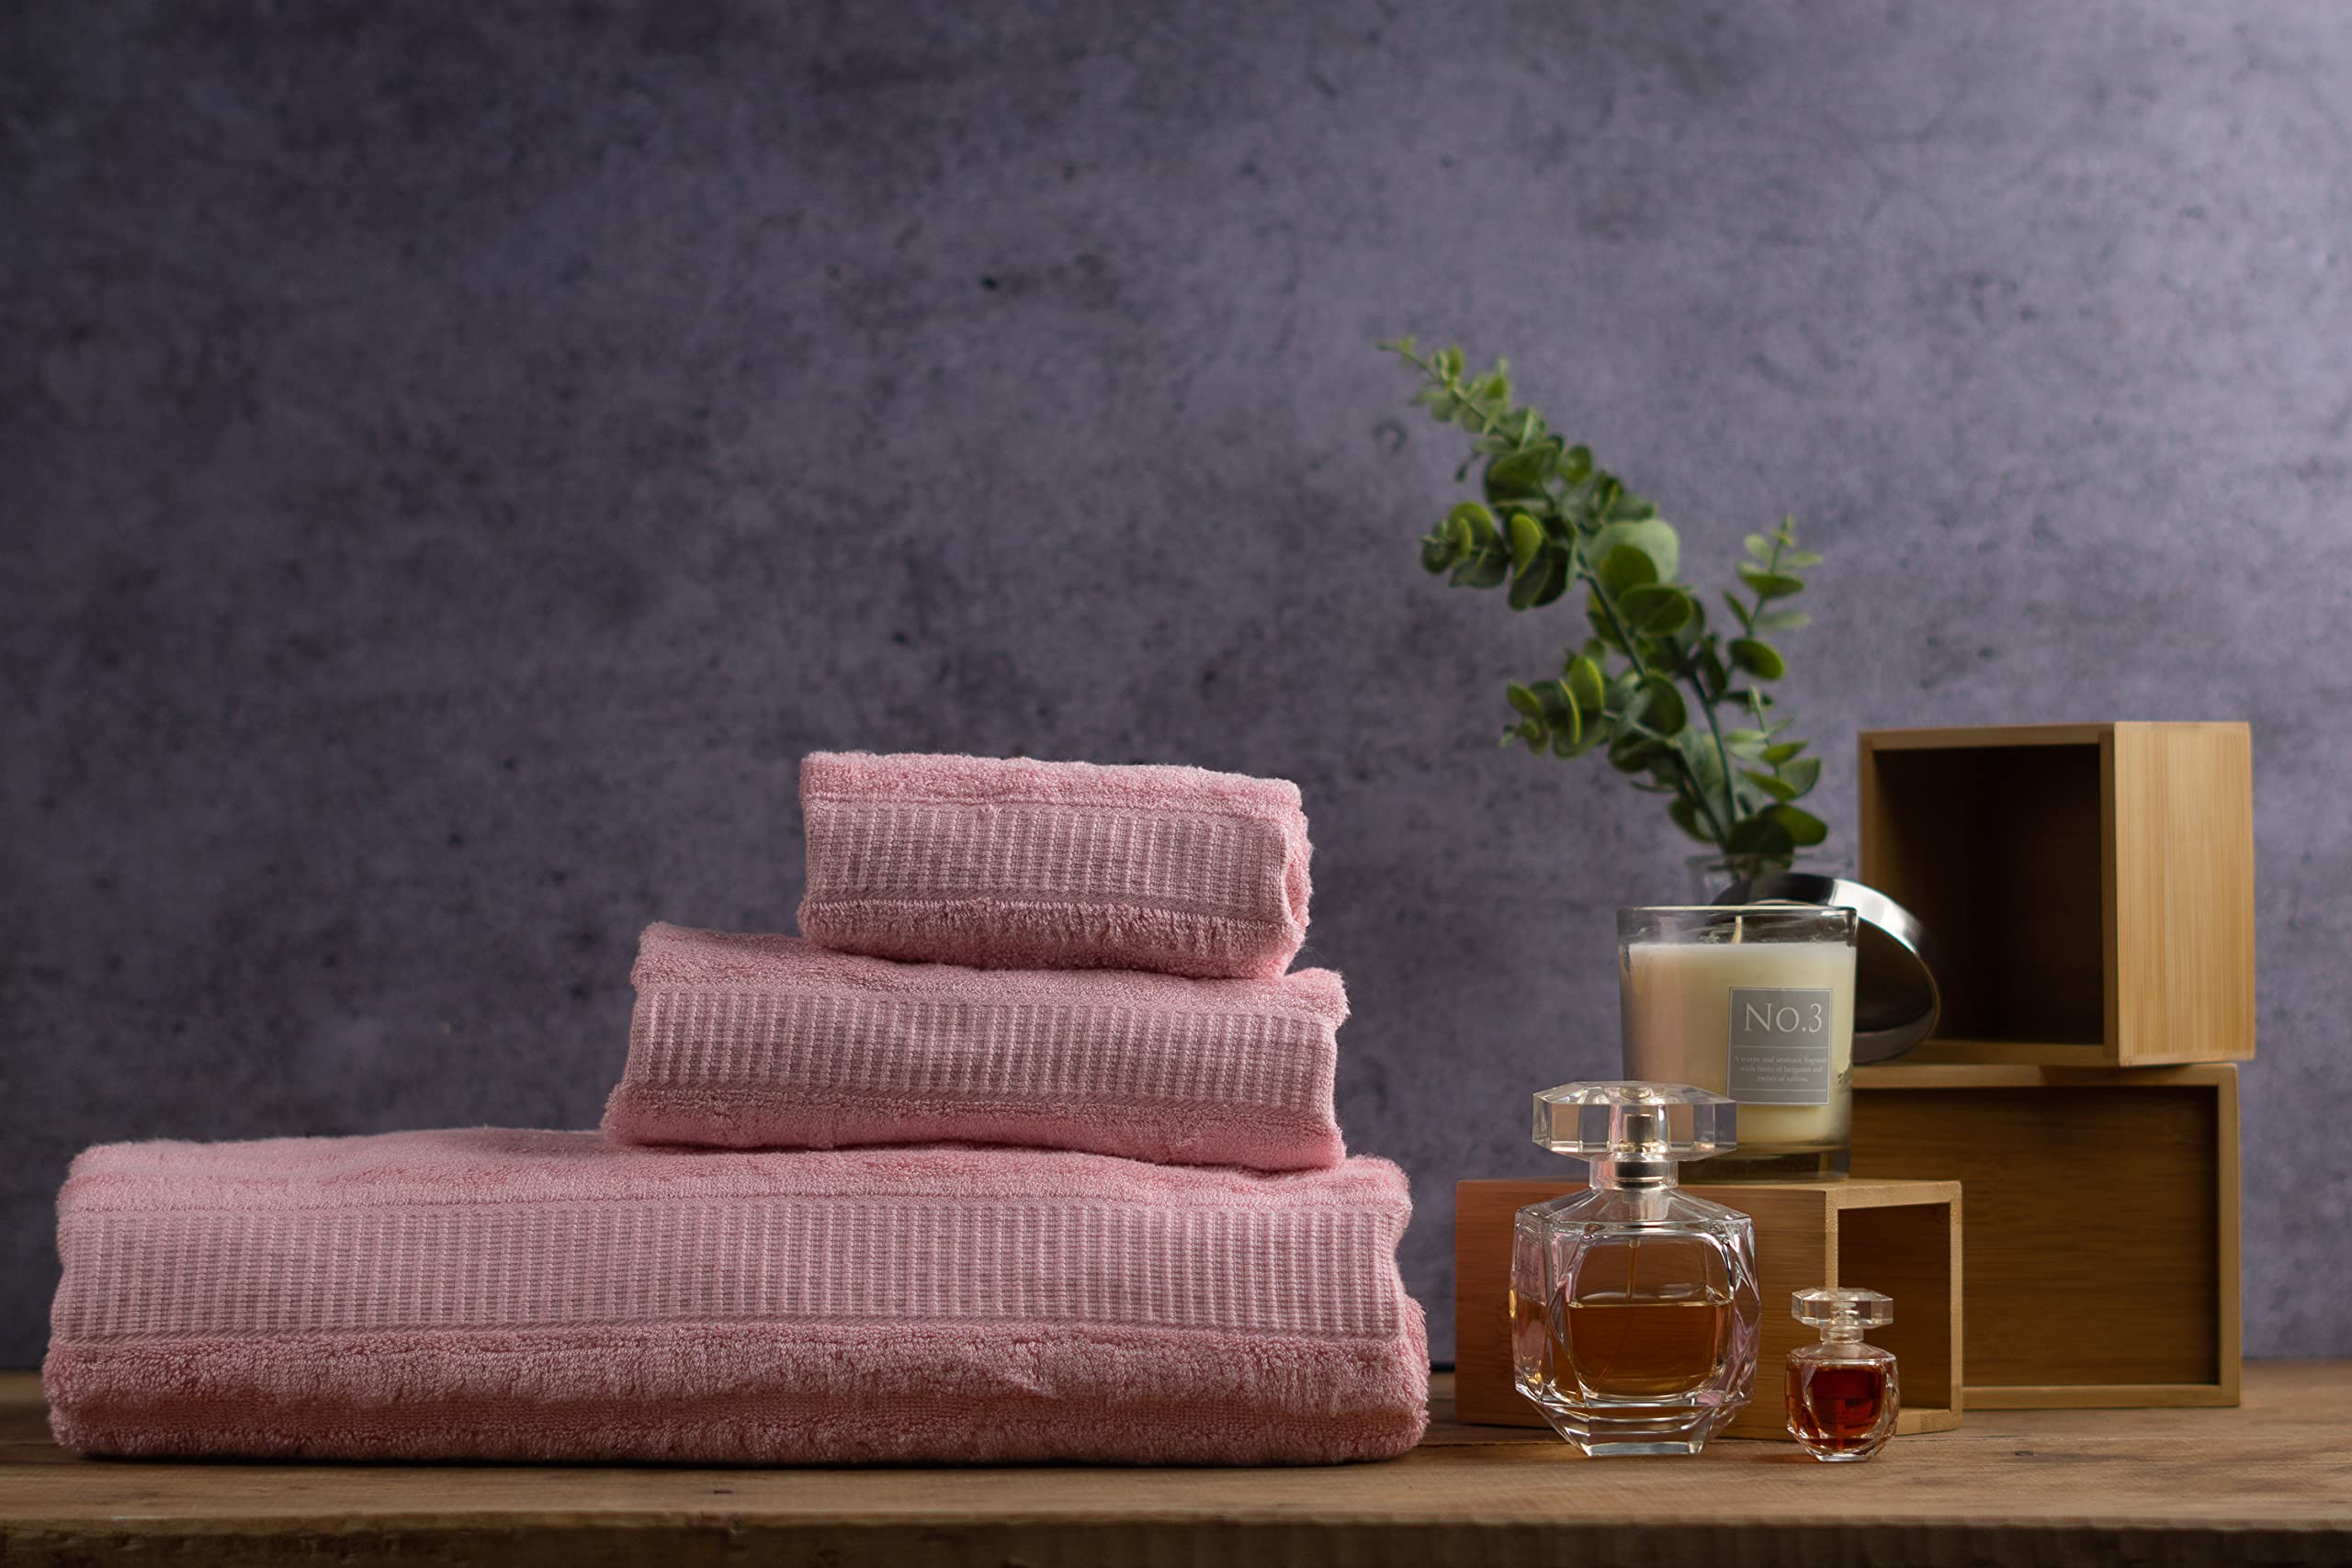 Mush Bamboo Luxurious 3 PieceTowels Set | Ultra Soft, Absorbent and Antimicrobial 600 GSM (Bath Towel, Hand Towel and Face Towel) Perfect for Daily Use and Gifting (Pink)